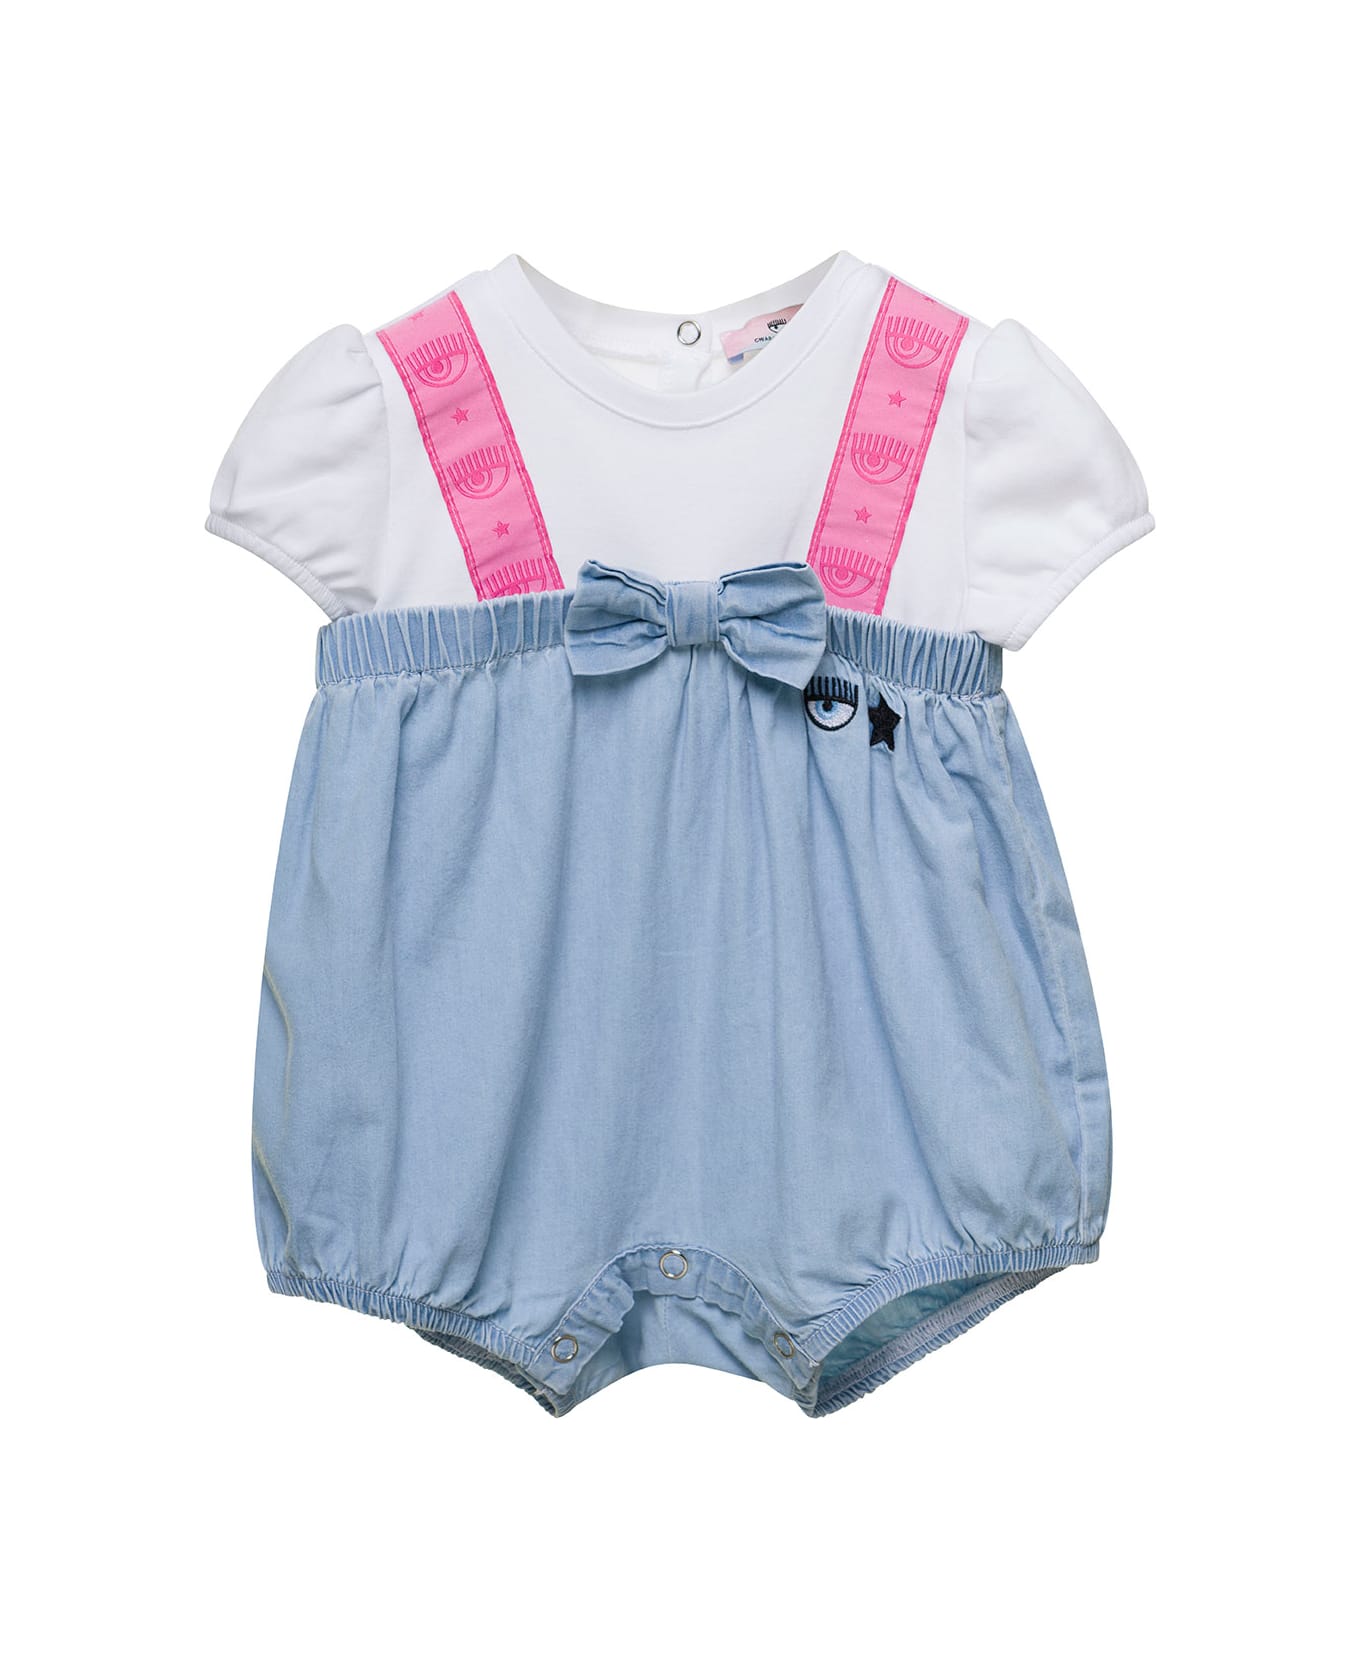 Chiara Ferragni Multicolor Dungarees Romper Suit With Logo And Bow Detail In Cotton Baby - Multicolor